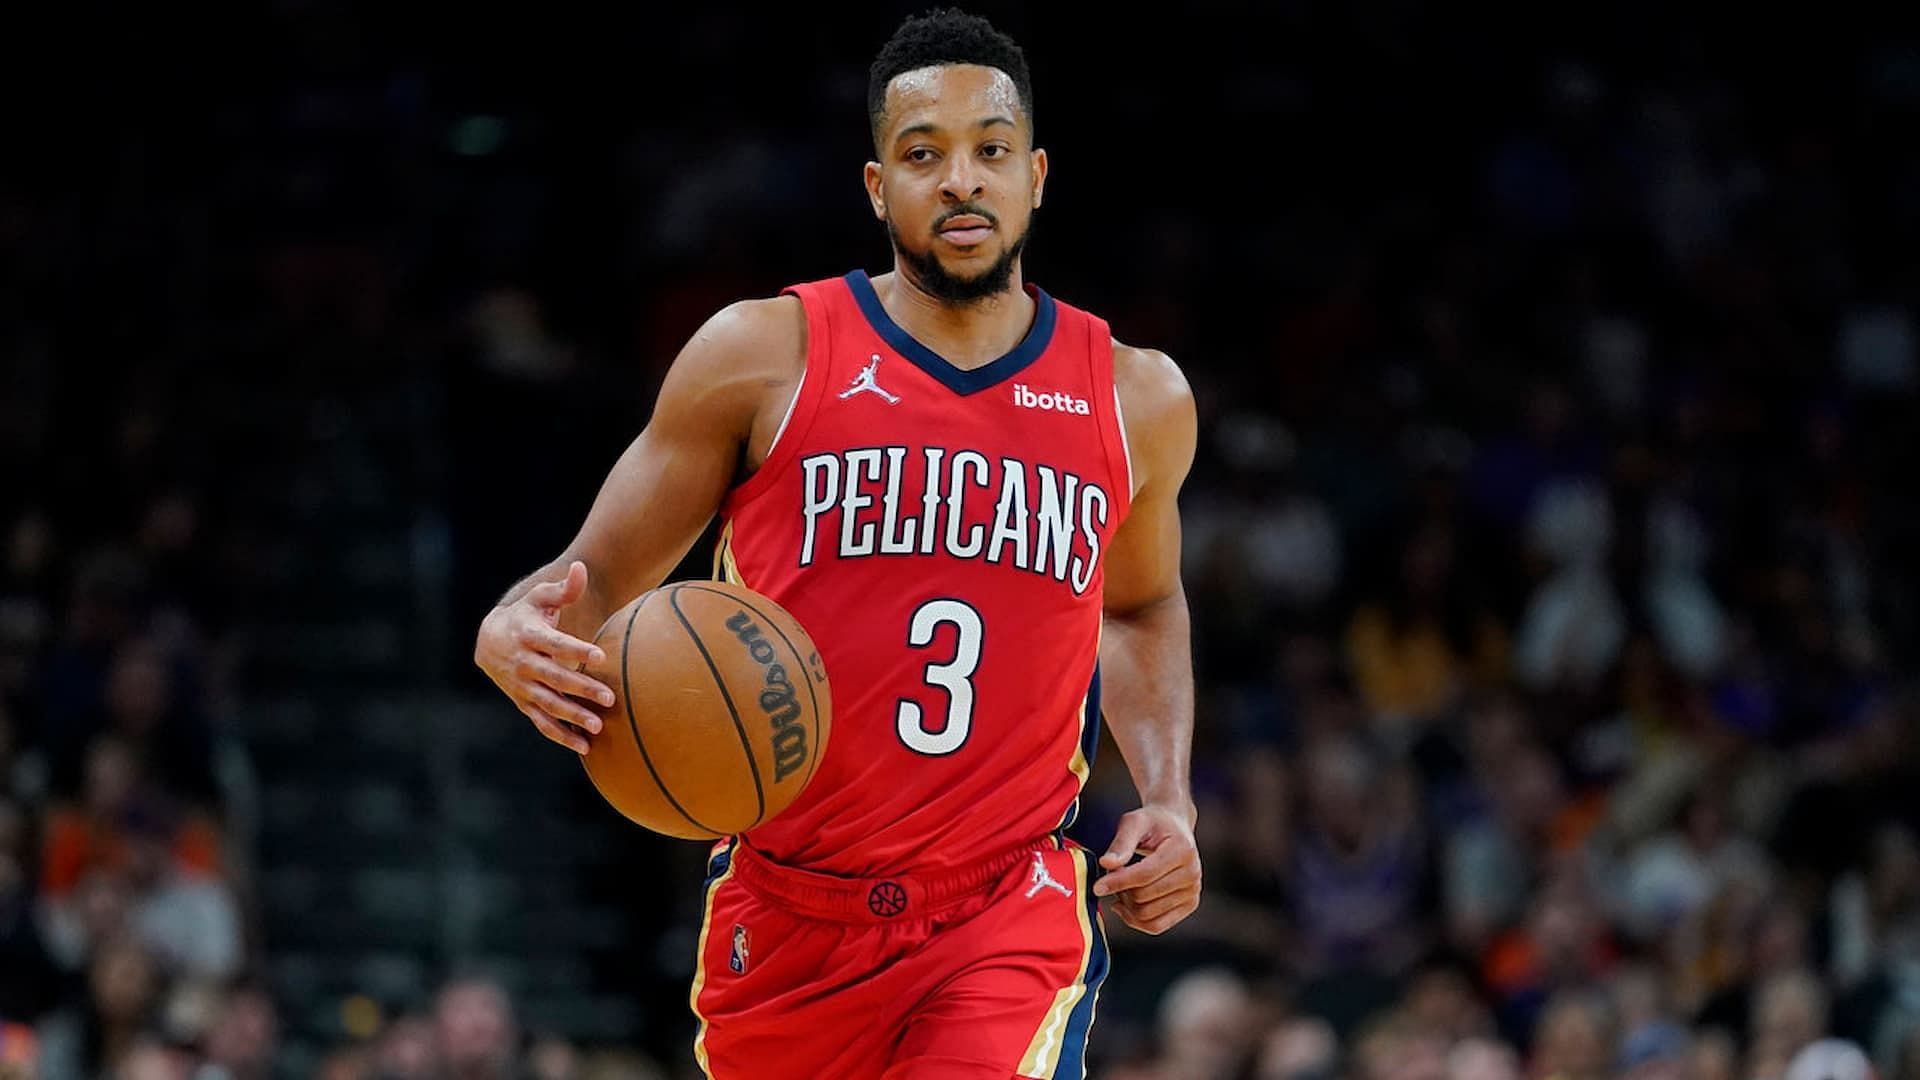 New Orleans Pelicans guard CJ McCollum could return to action this week